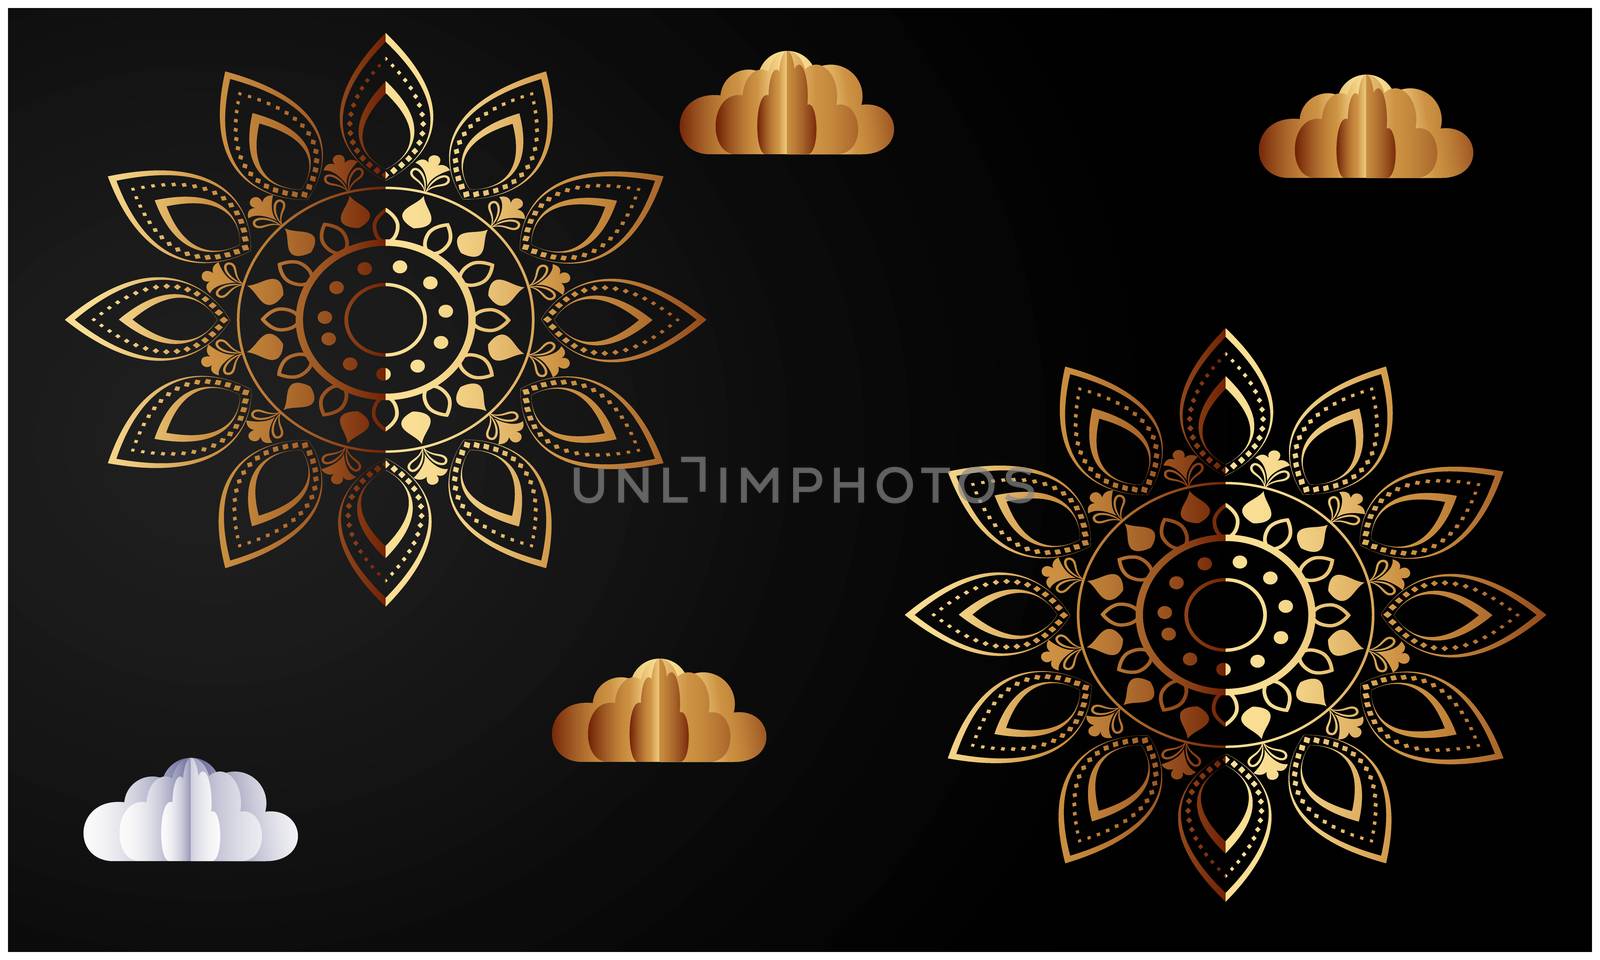 digital textile design of gold clouds with flowers on abstract background by aanavcreationsplus